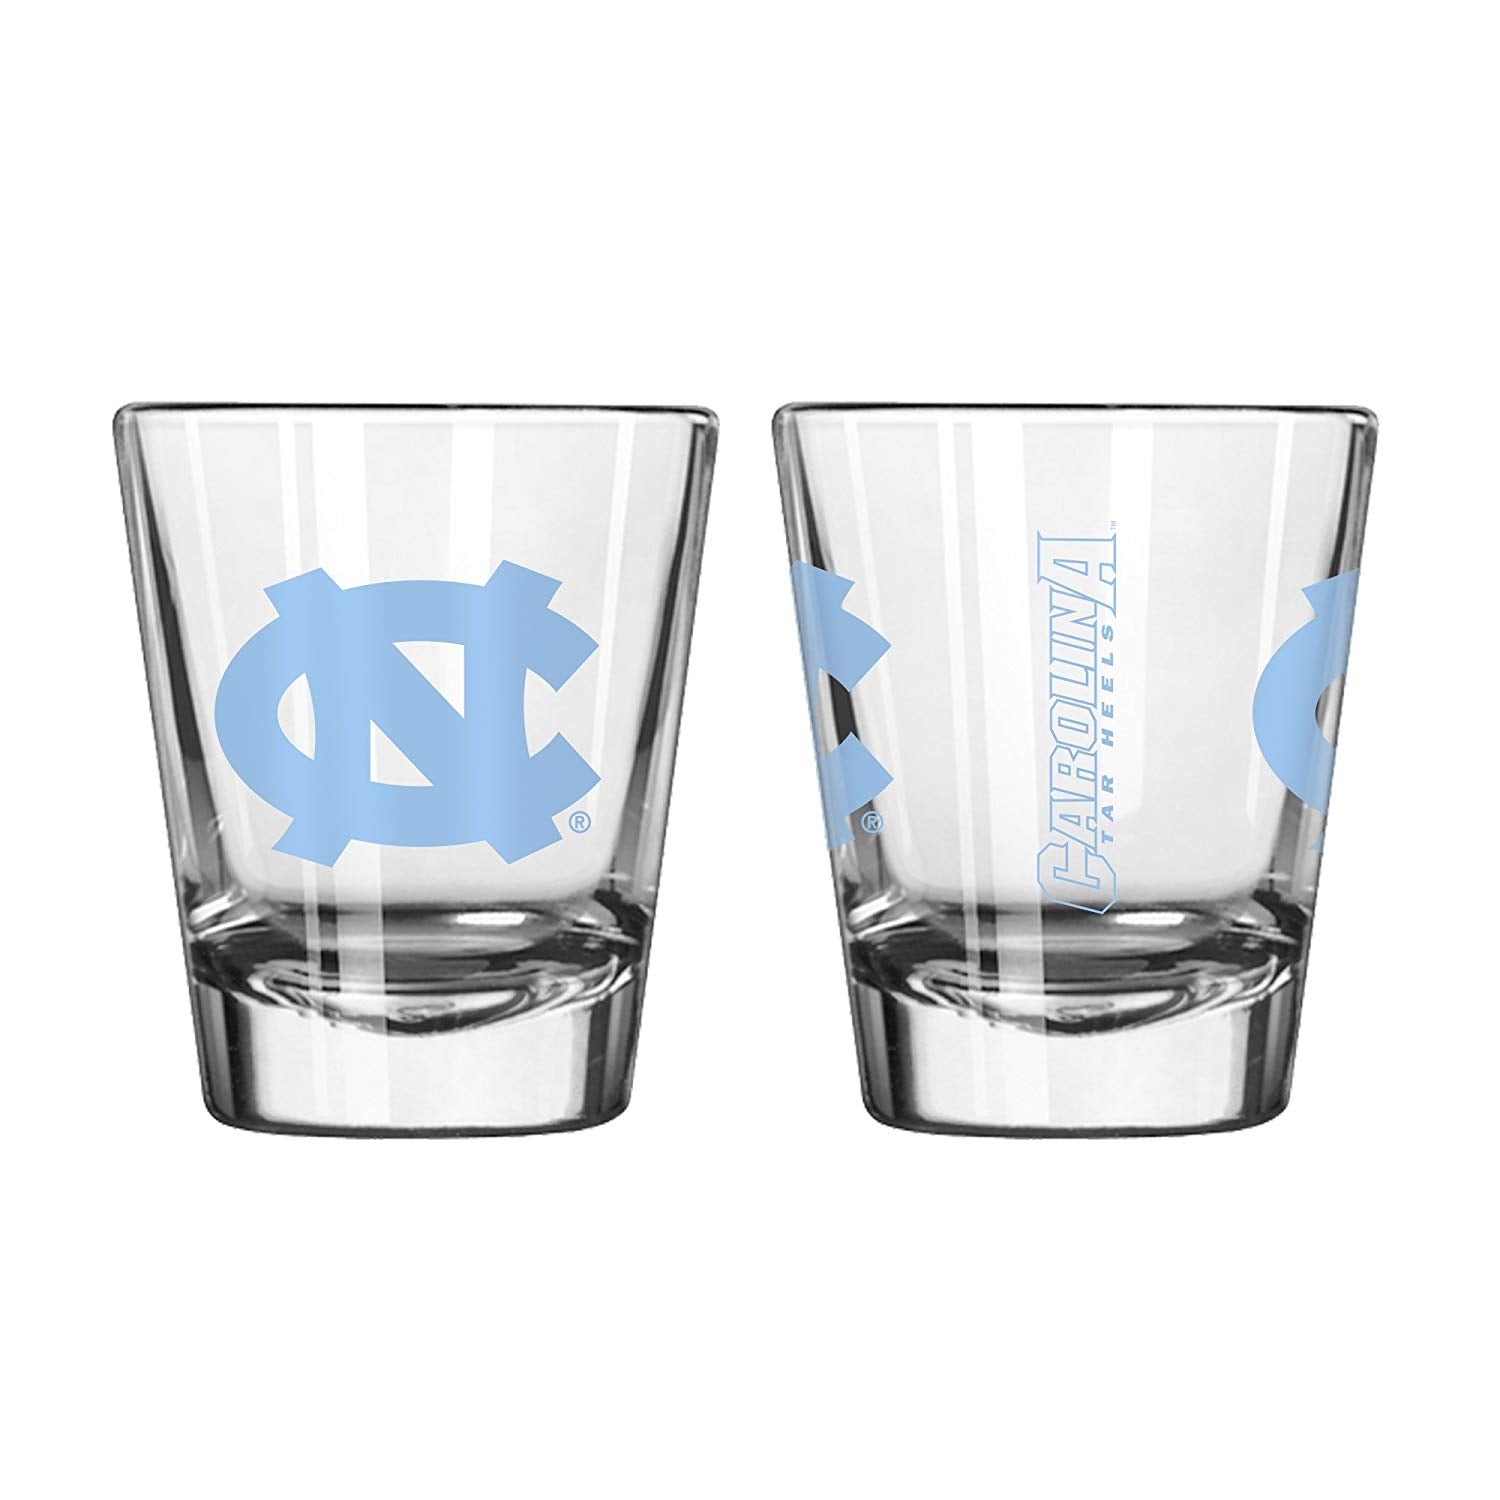 Official Fan Shop Authentic NCAA Logo 2 oz. Shot Glasses 2-Pack Bundle. Show your School and Team Pride at home, your Bar or at the Tailgate. Great Collegiate Gift